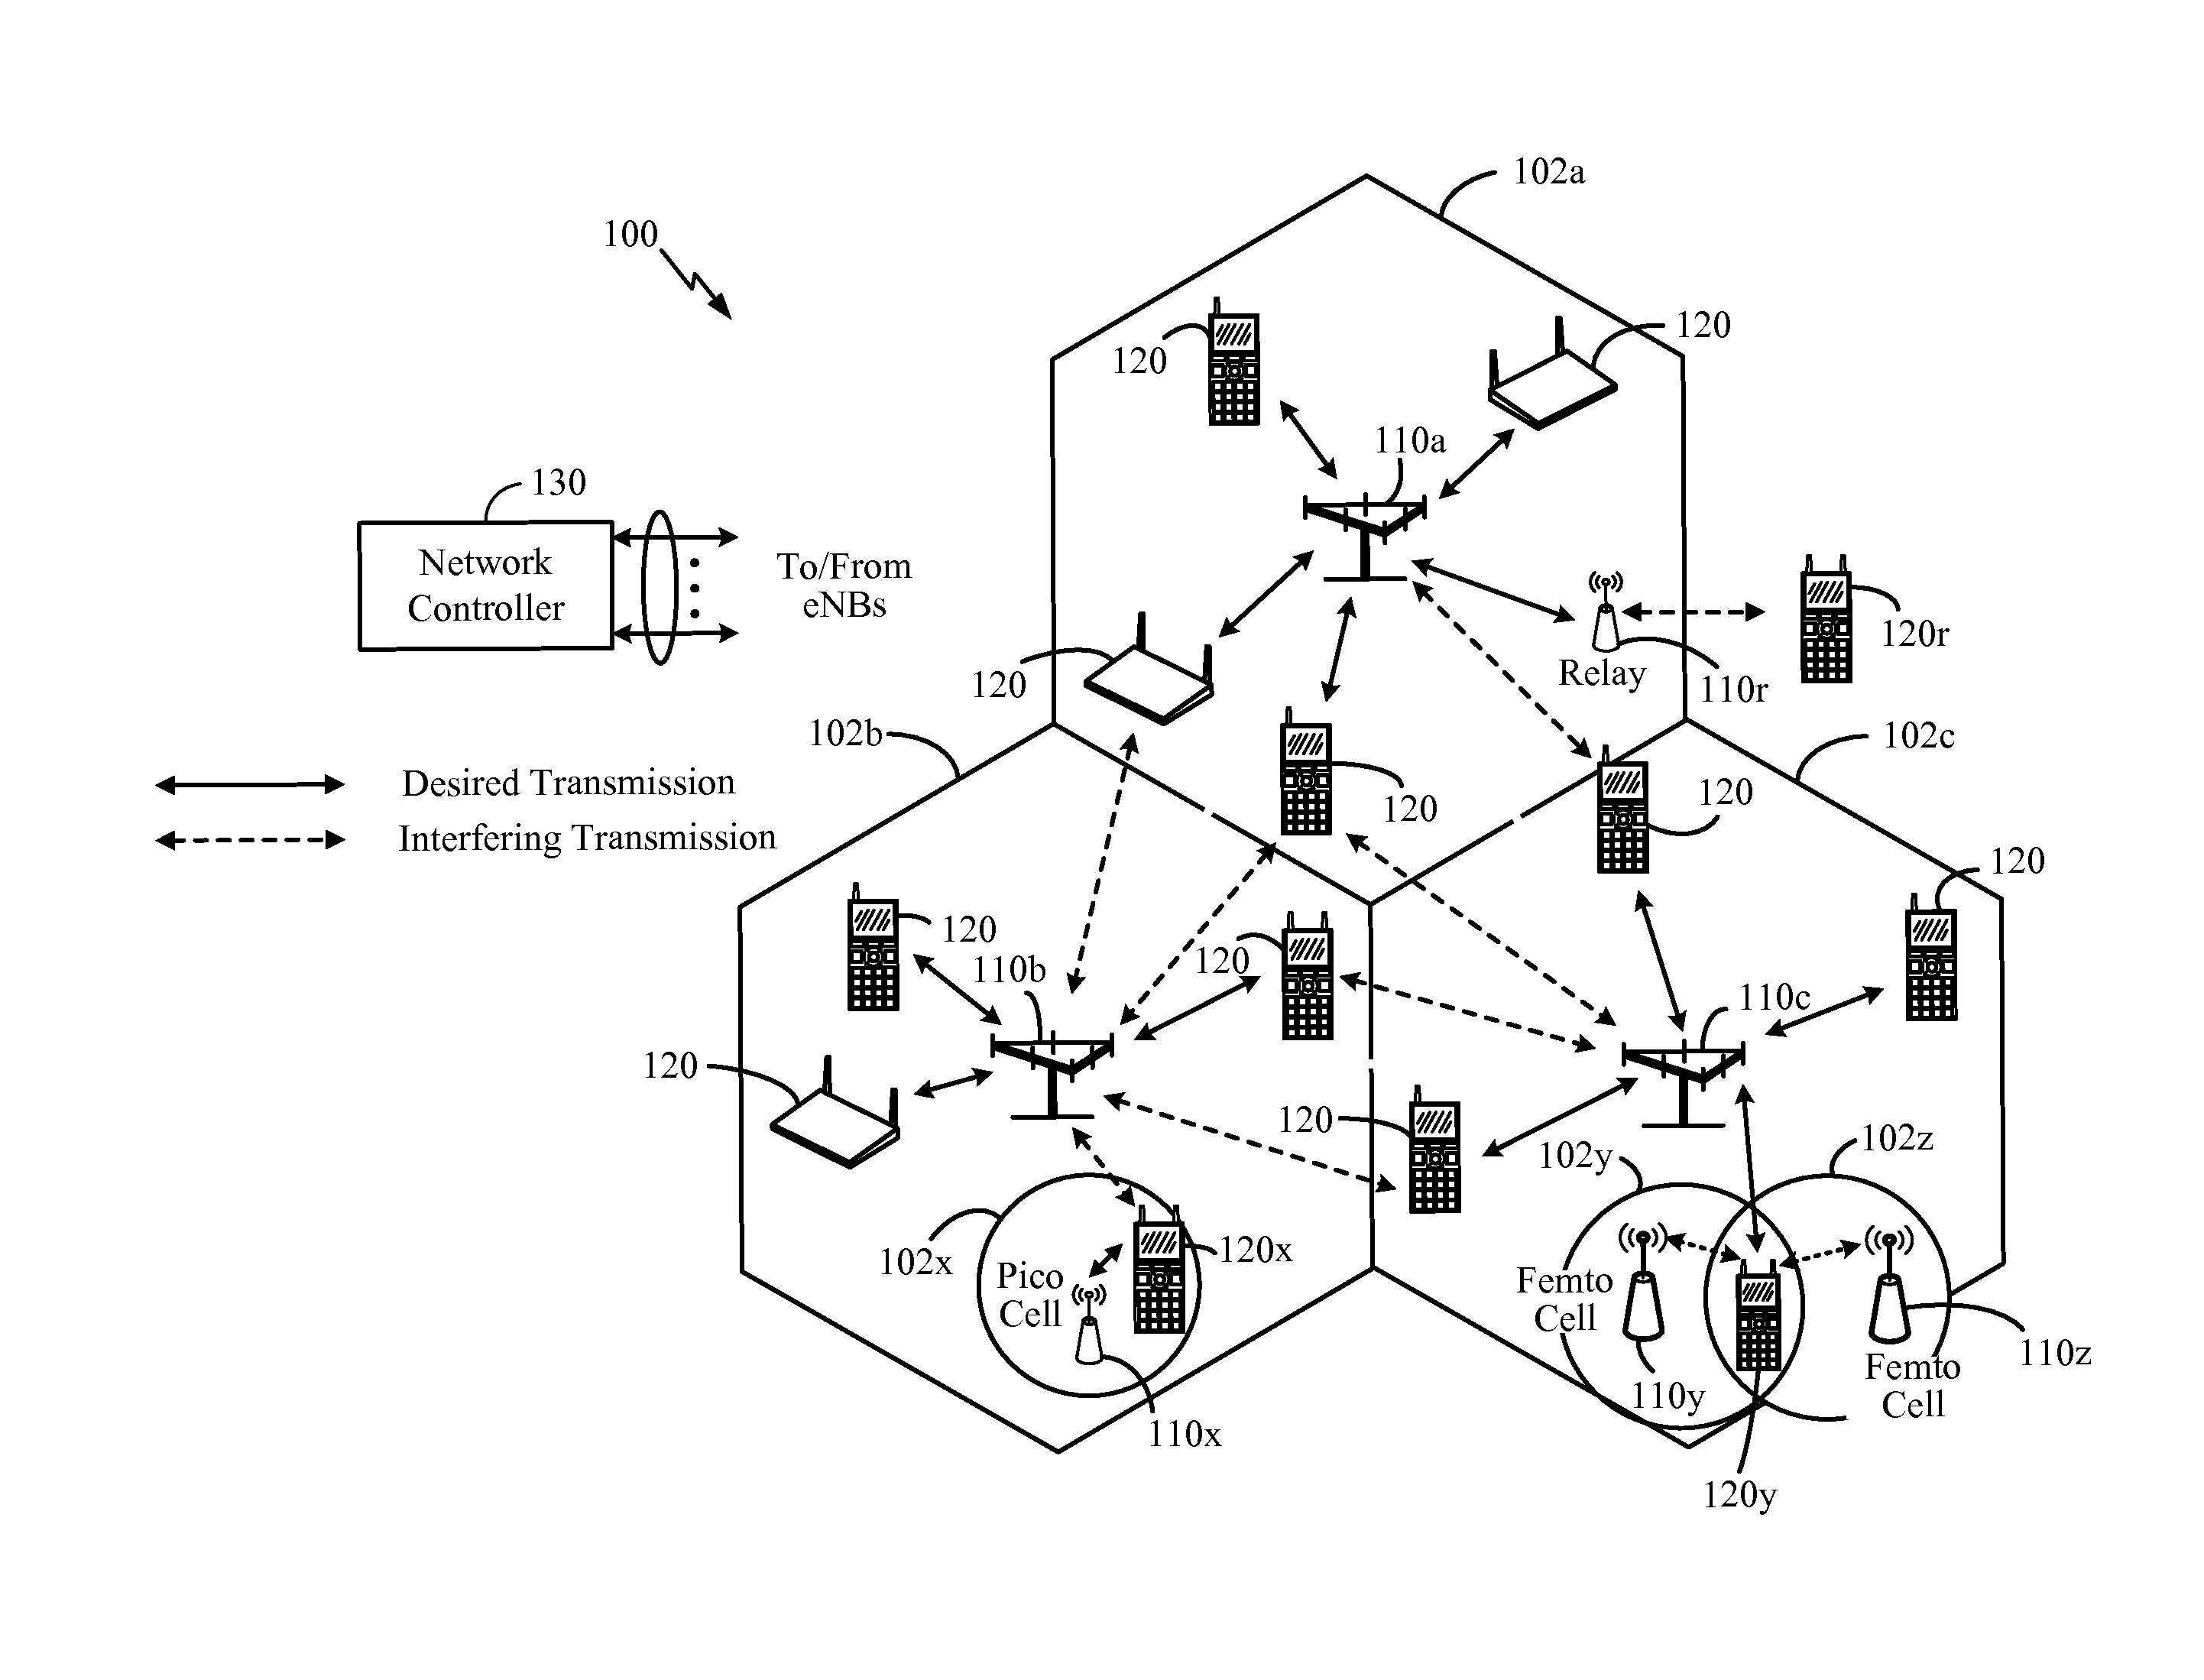 Power control and user multiplexing for heterogeneous network coordinated multipoint operations